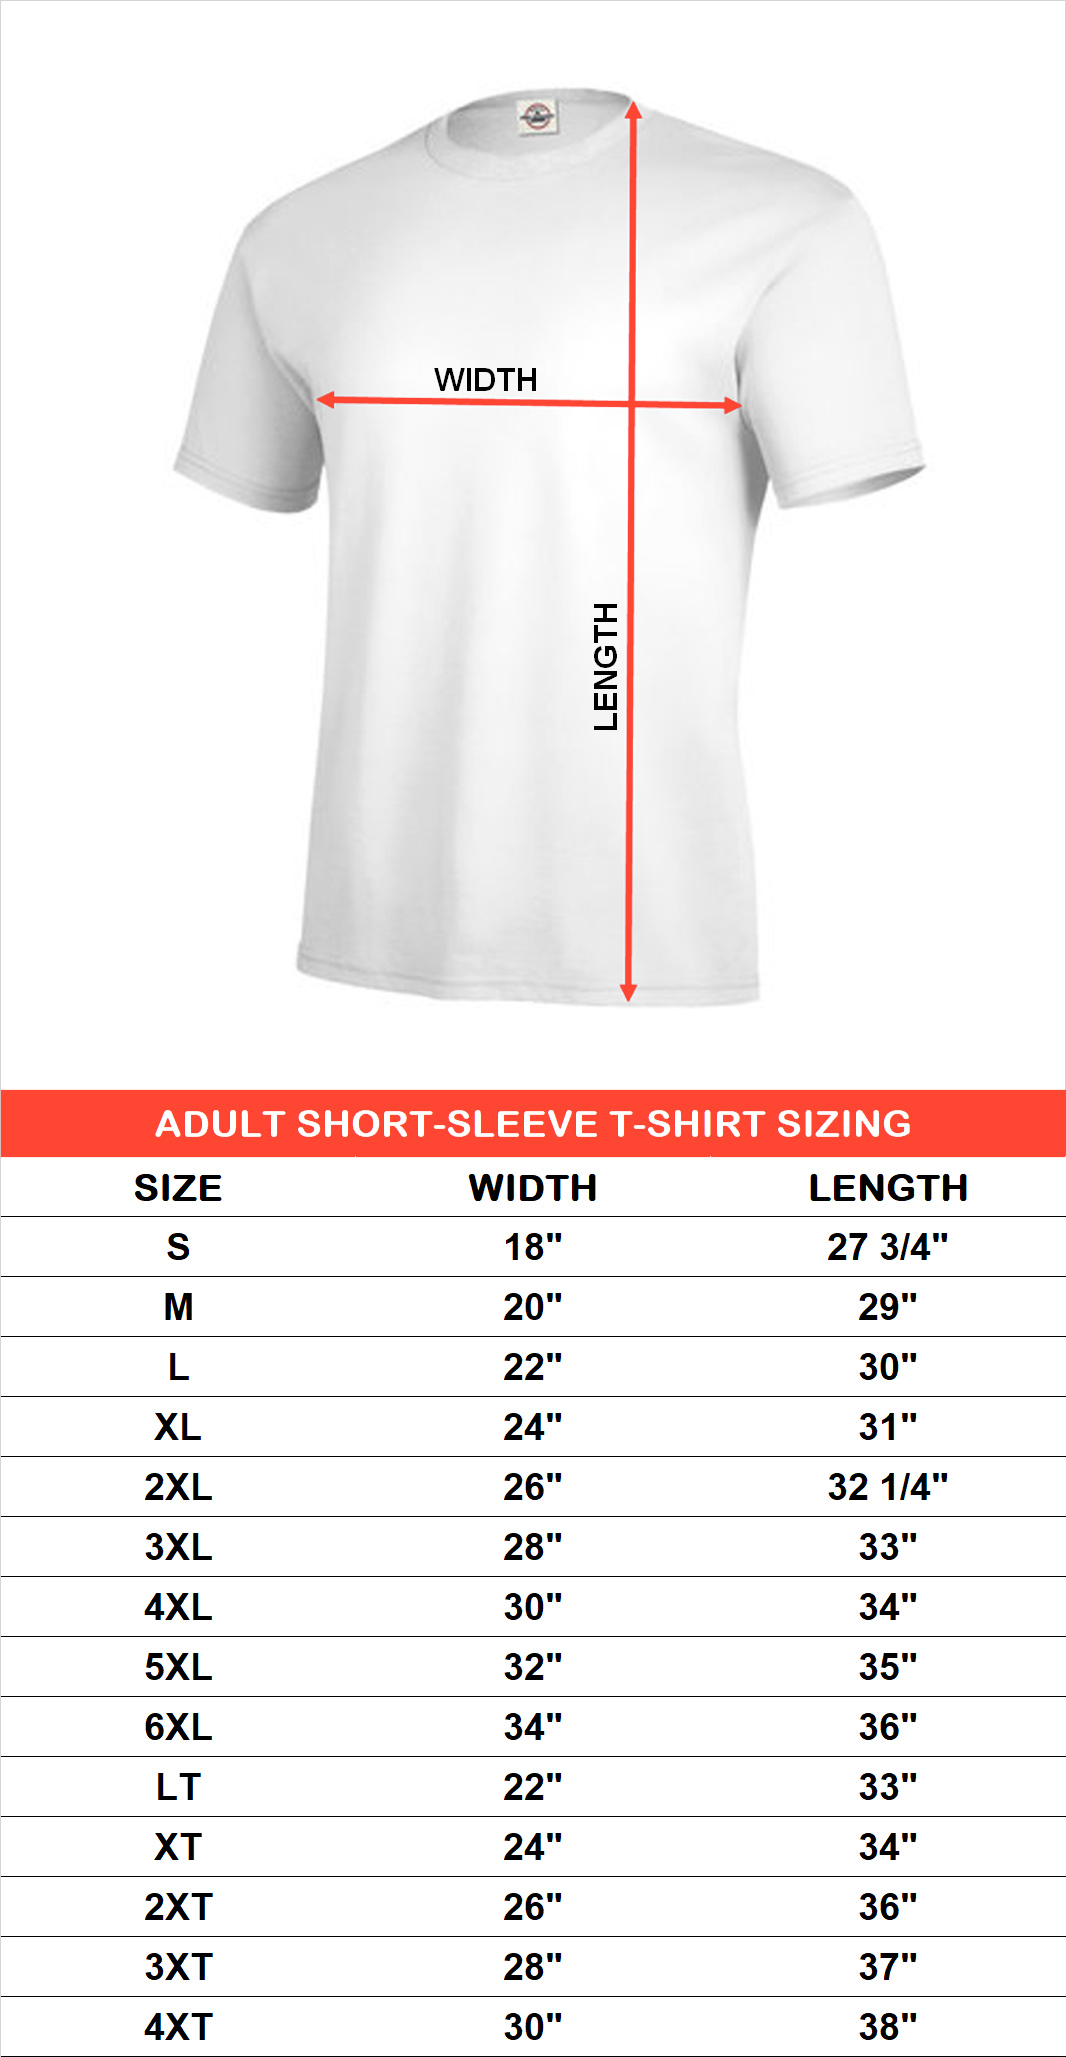 Sizing chart for Led Zeppelin T-Shirt - USA 77 With Flag